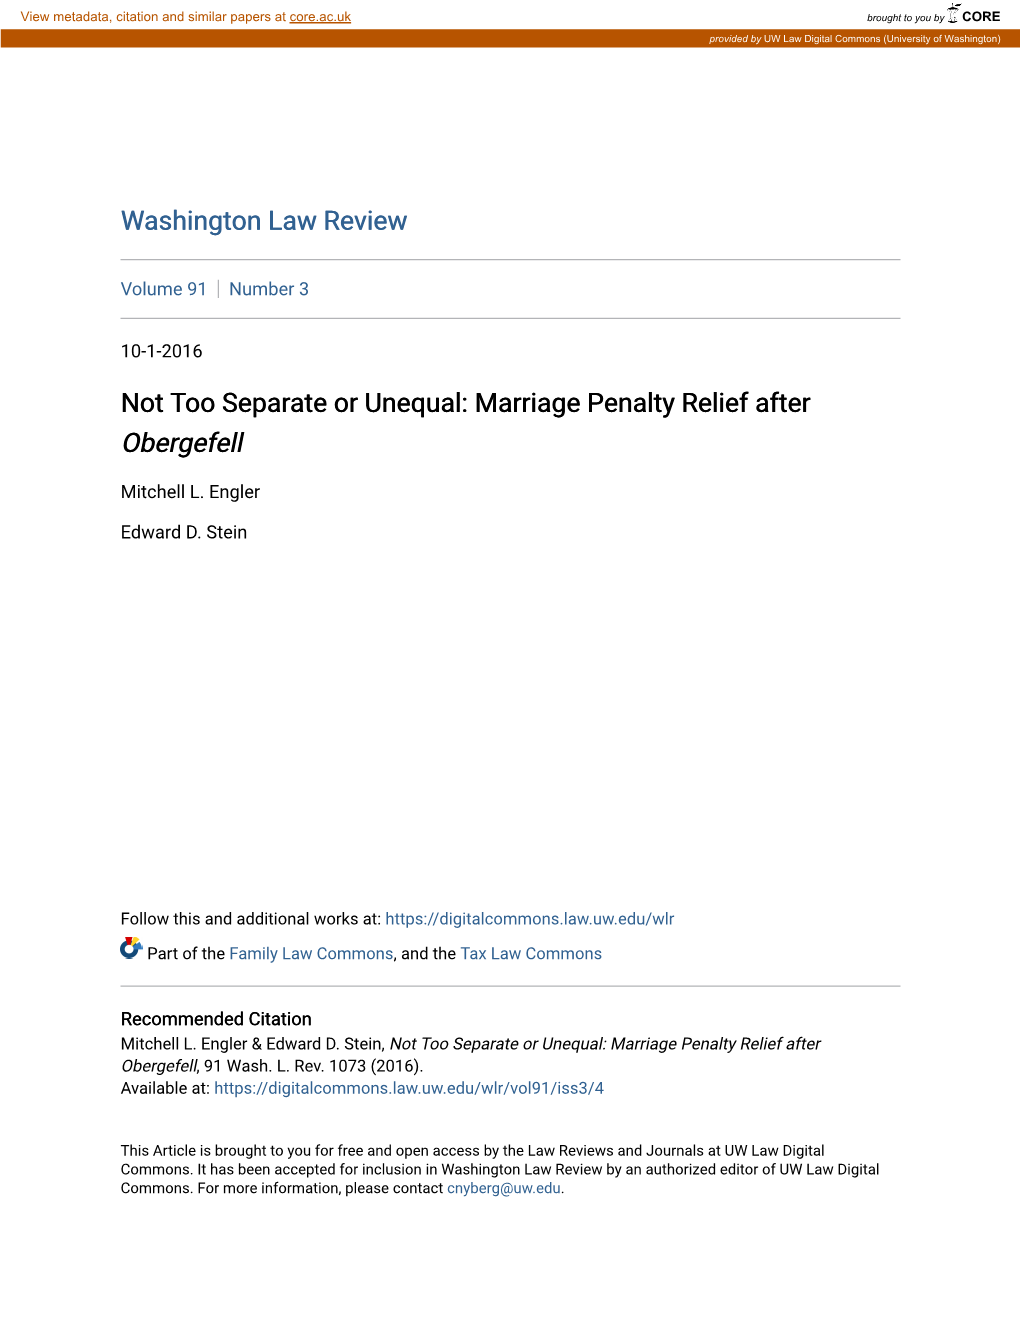 Not Too Separate Or Unequal: Marriage Penalty Relief After Obergefell